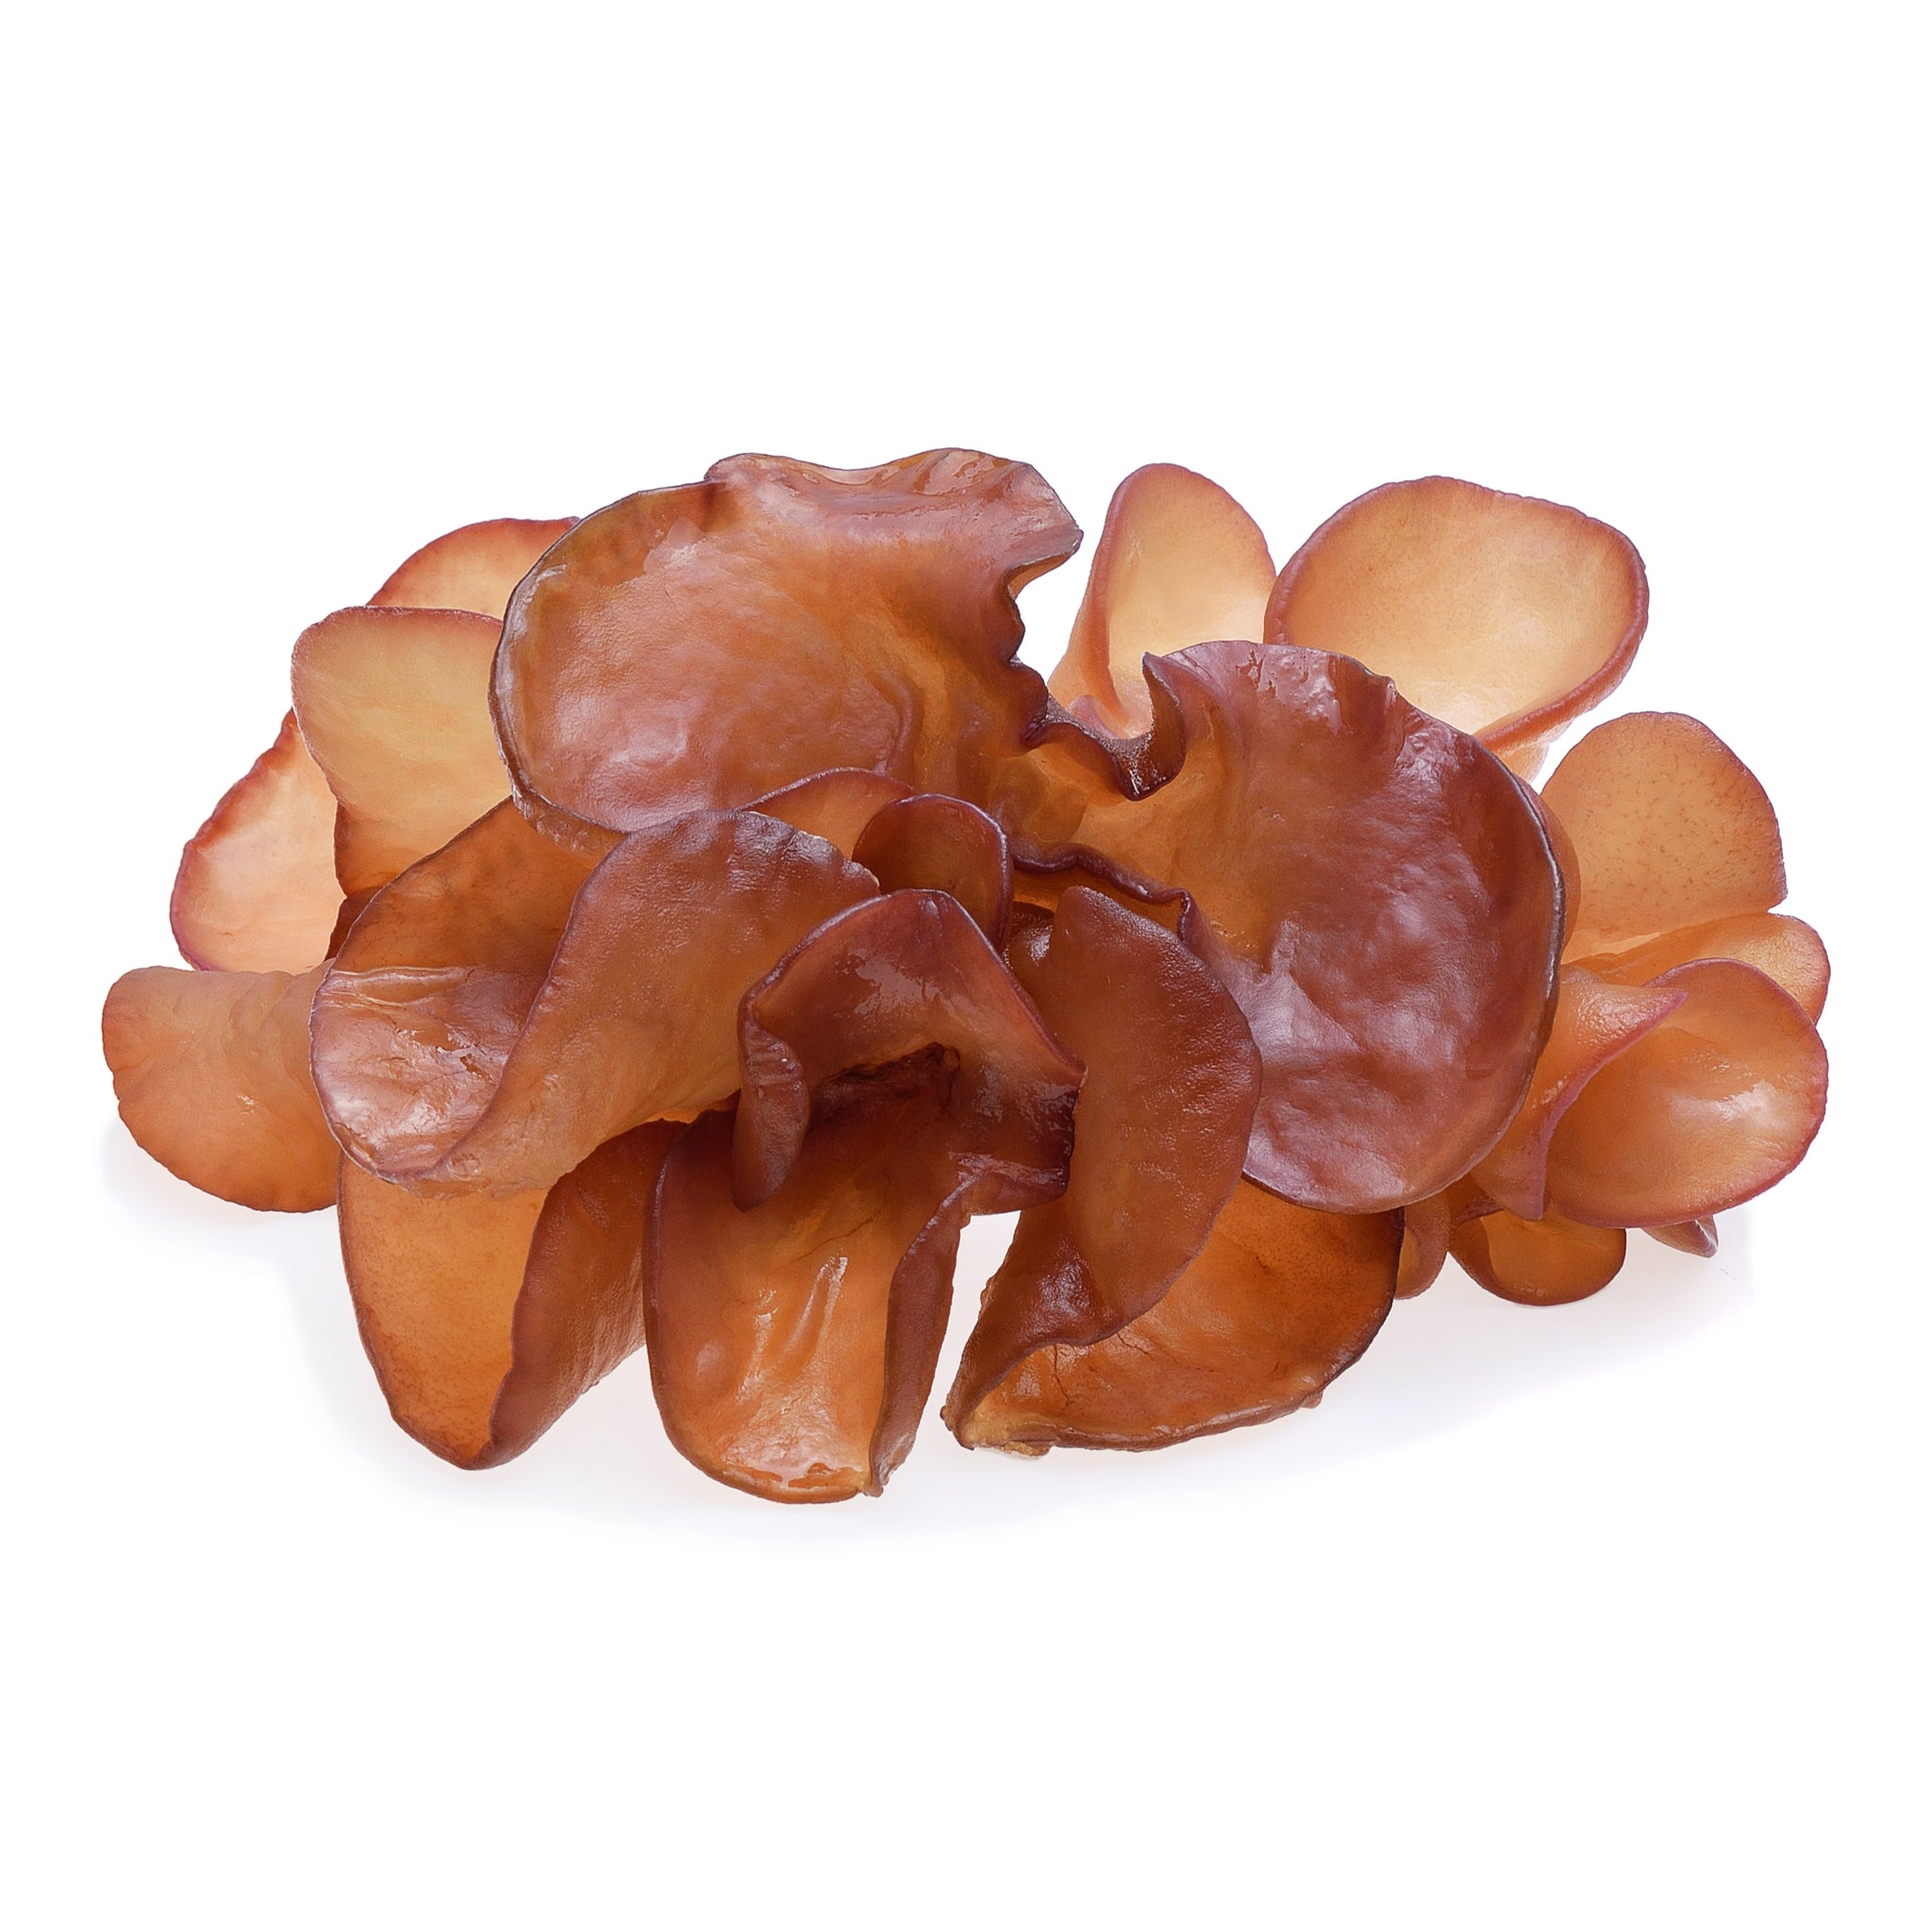 Fresh Thai Wood Ear Mushrooms 100g - Imported Weekly from Thailand